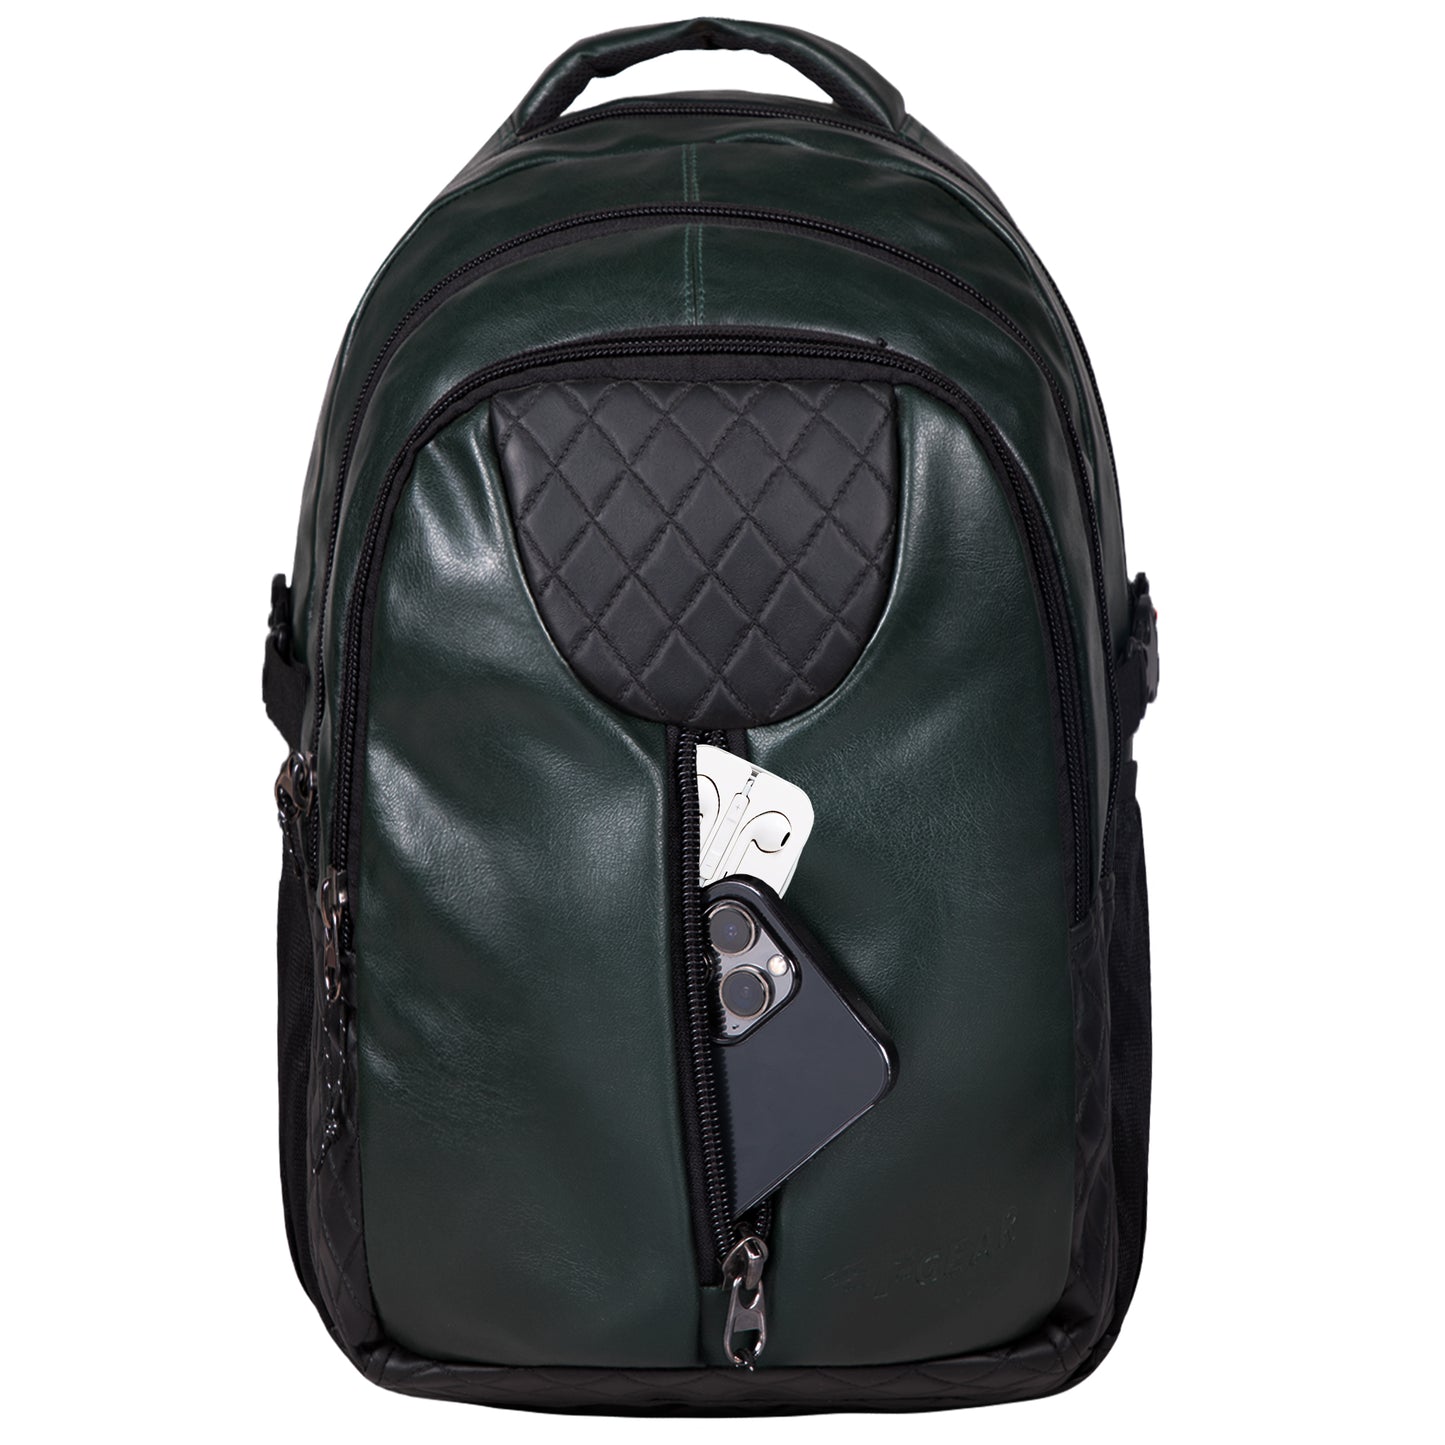 Tycoon 27L Olive Green Laptop Backpack